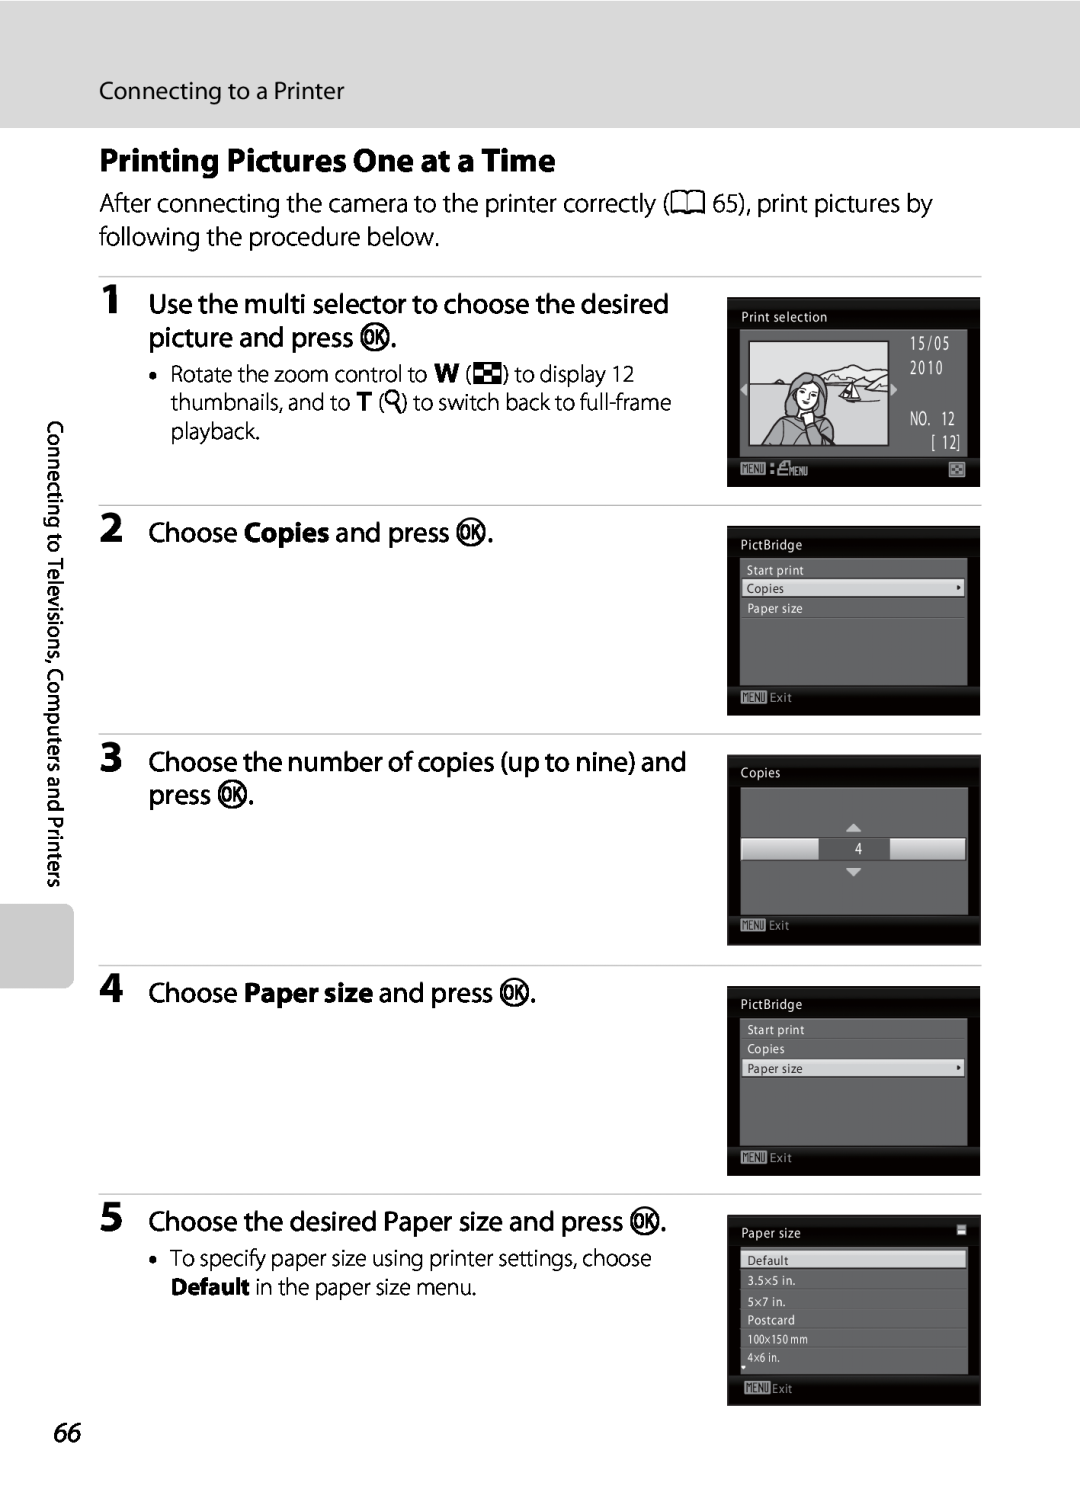 Nikon COOLPIXL22R Printing Pictures One at a Time, Use the multi selector to choose the desired, picture and press k, Exit 